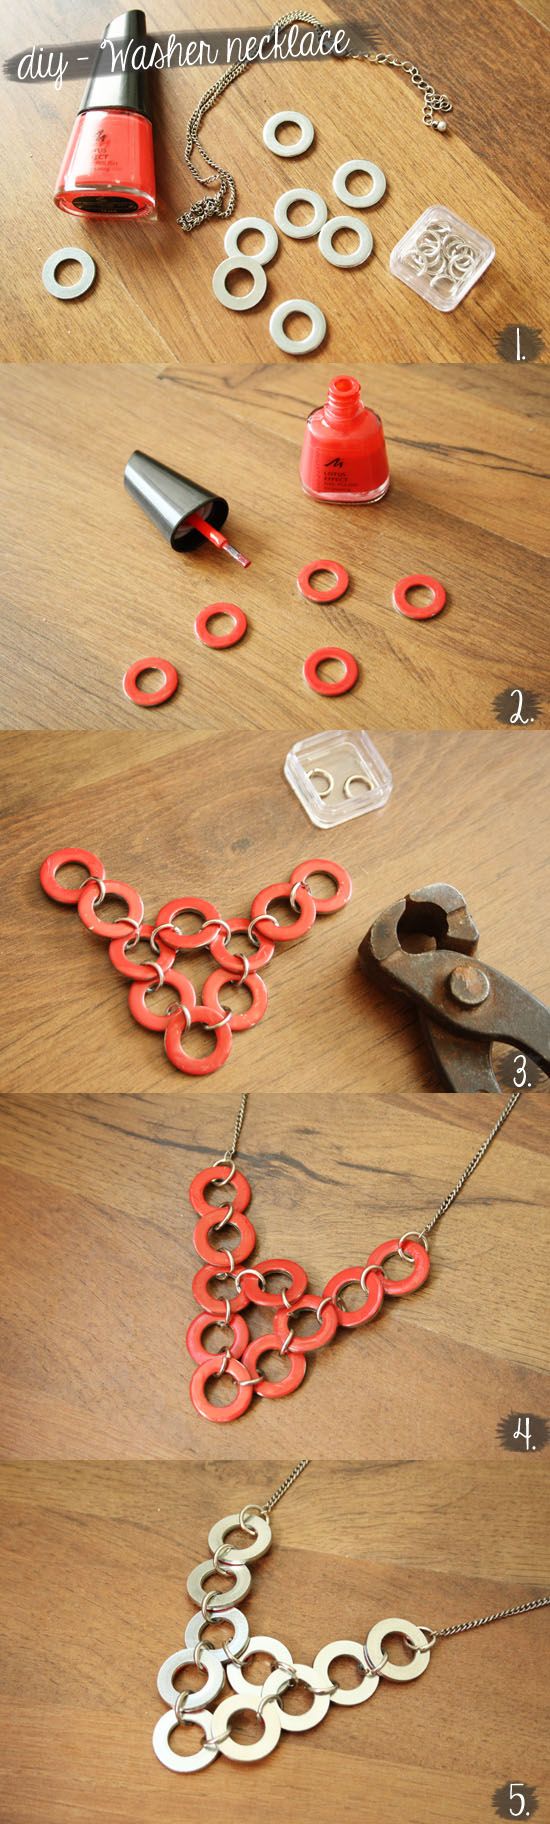 DIY – Washer necklace @ By Wilma